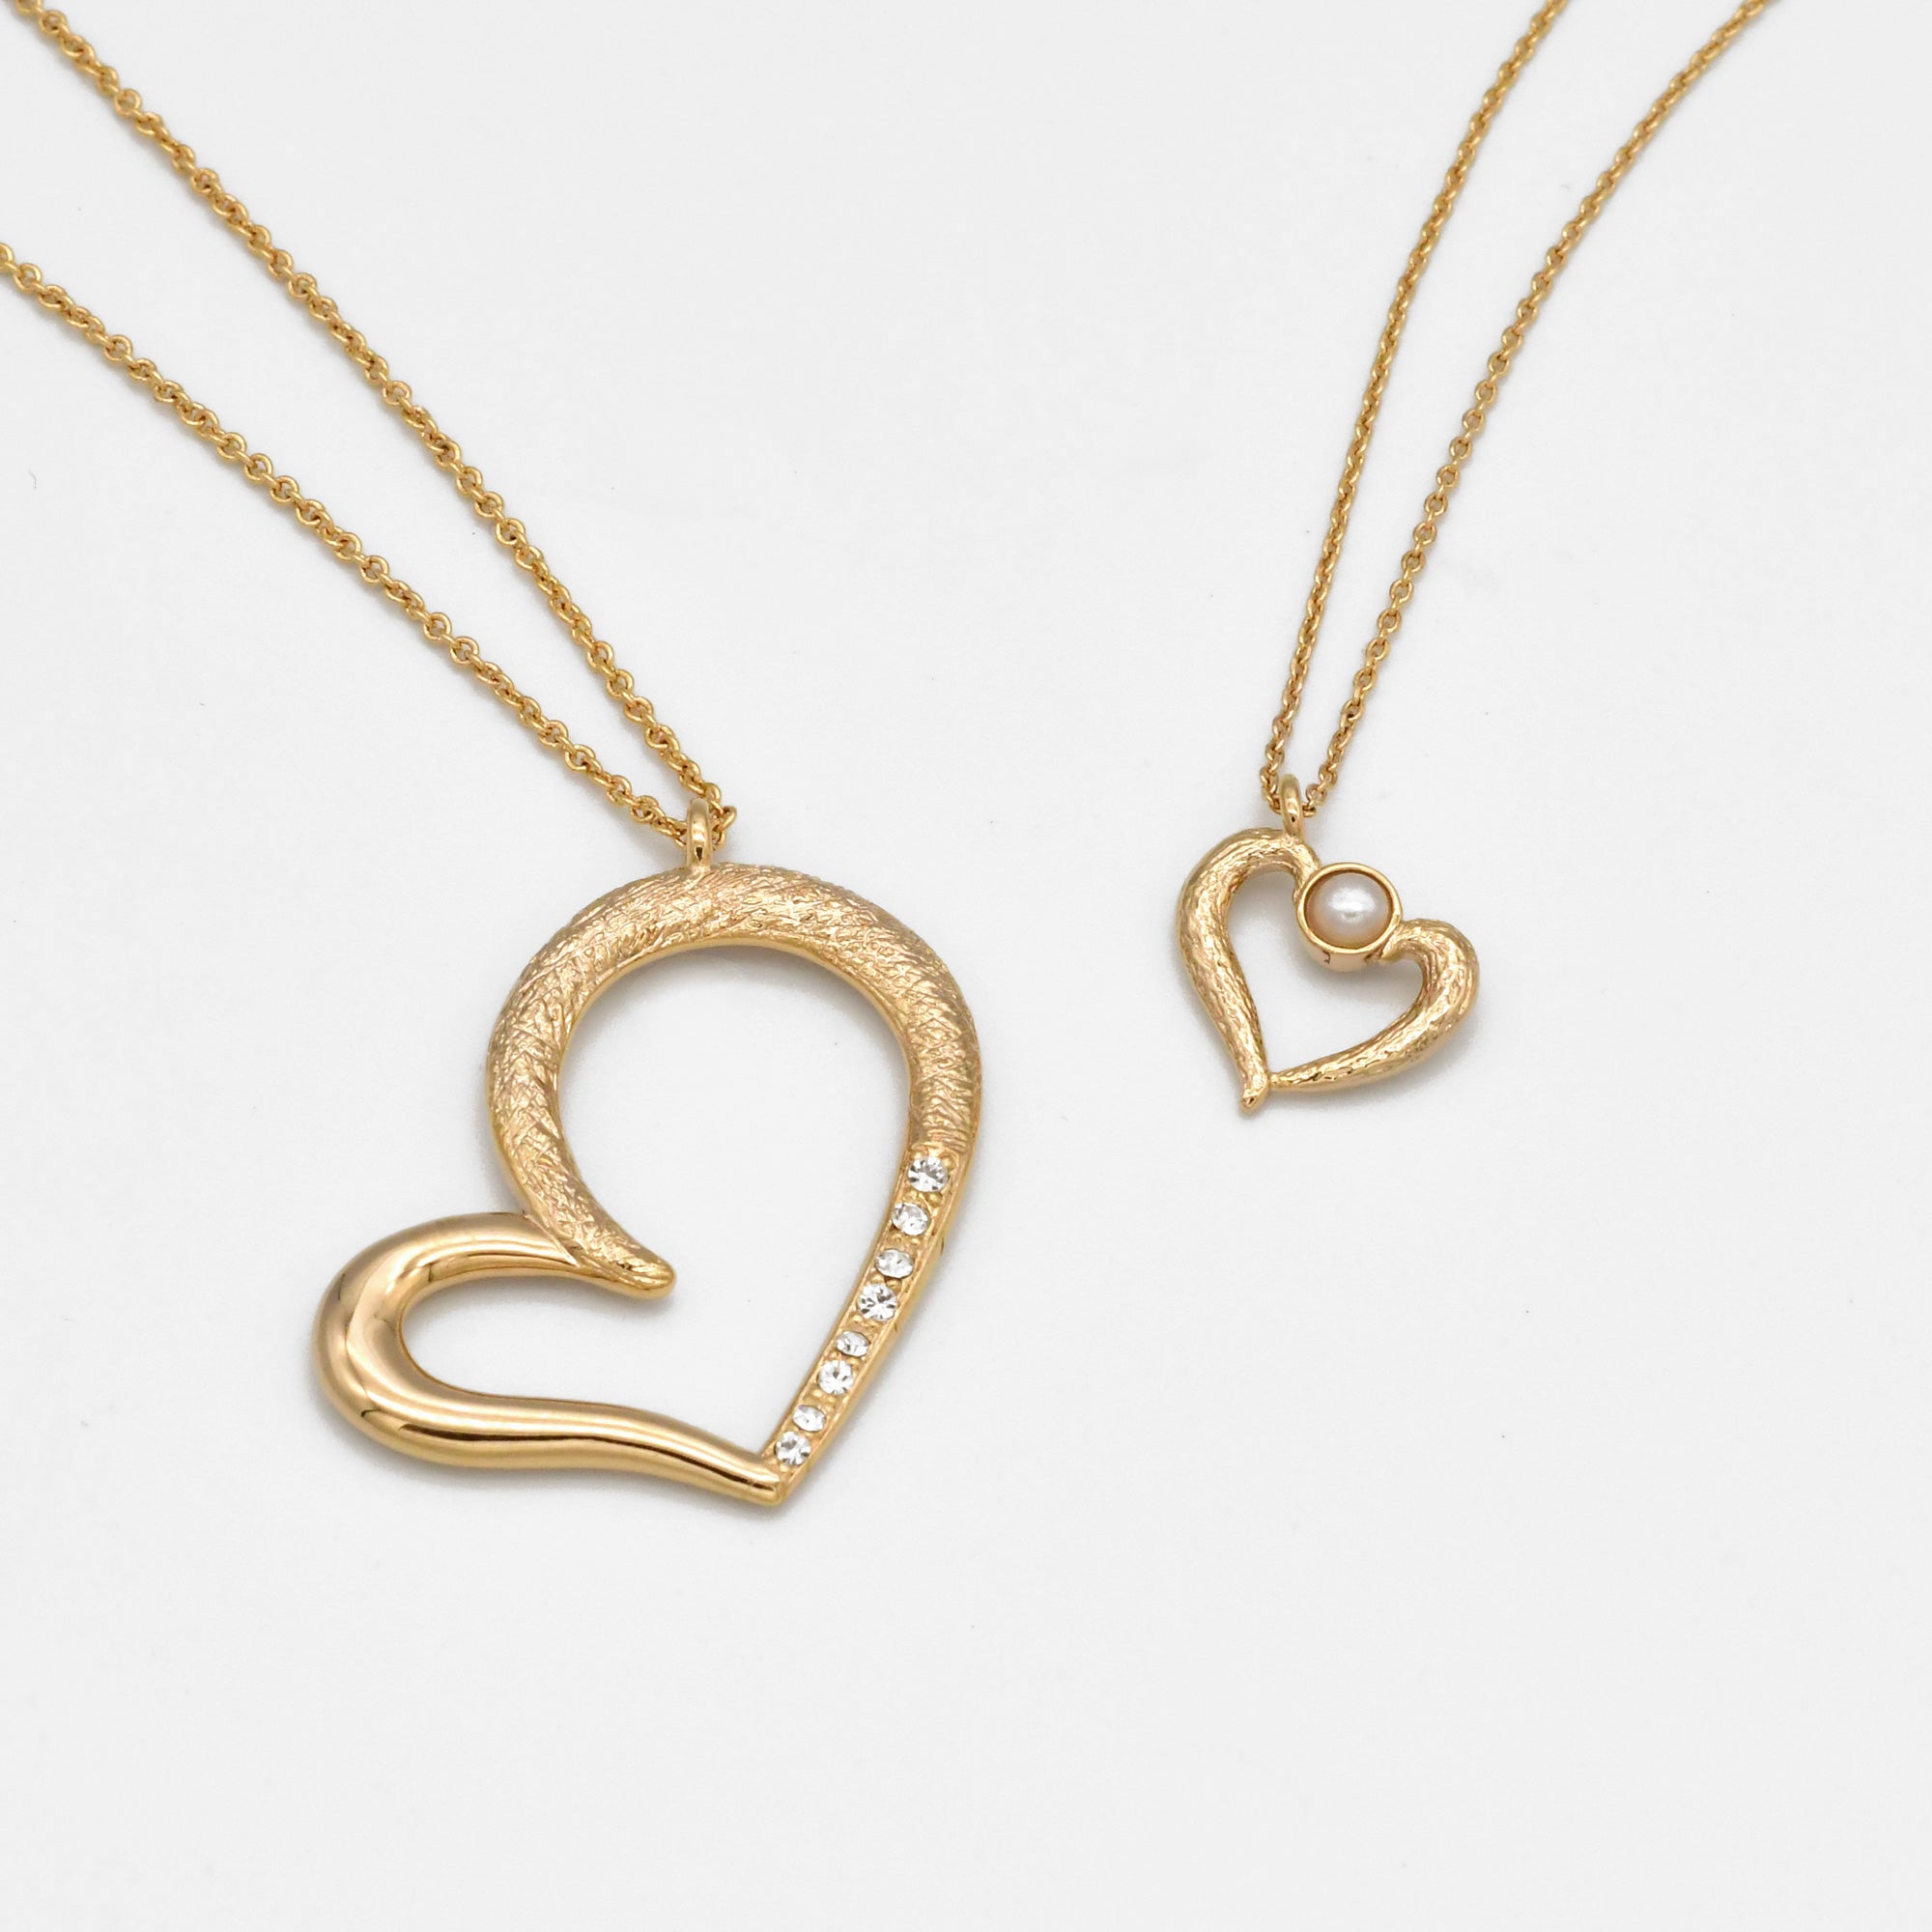 Ahn Mika smile heart necklace